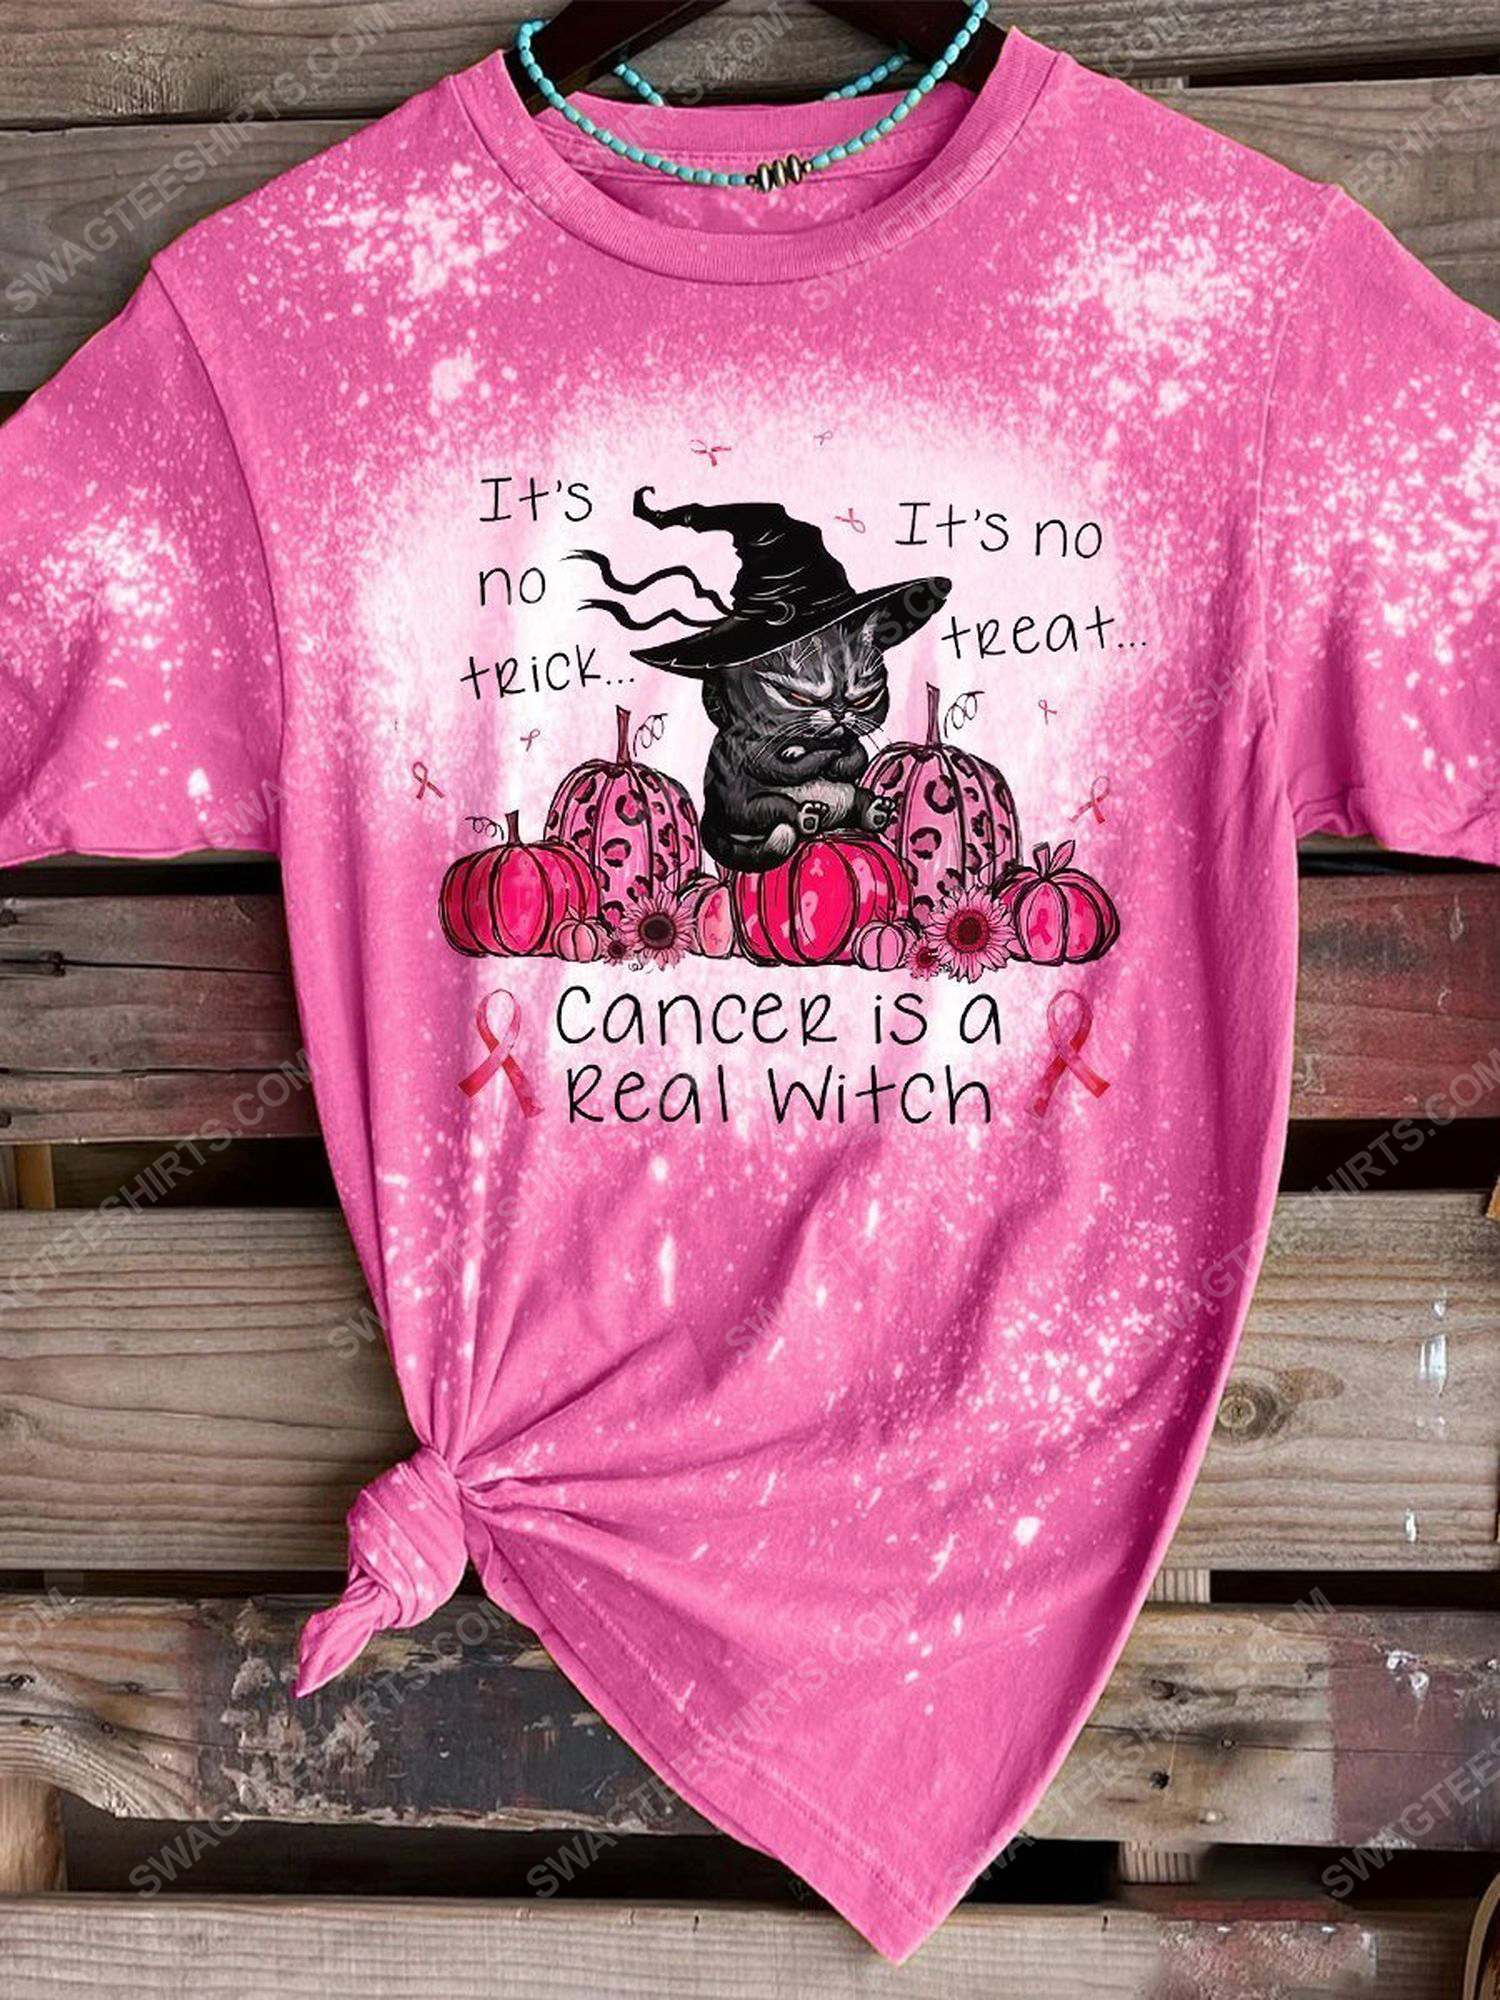 Breast cancer awareness it's no trick it's no treat cancer is a real witch bleached shirt